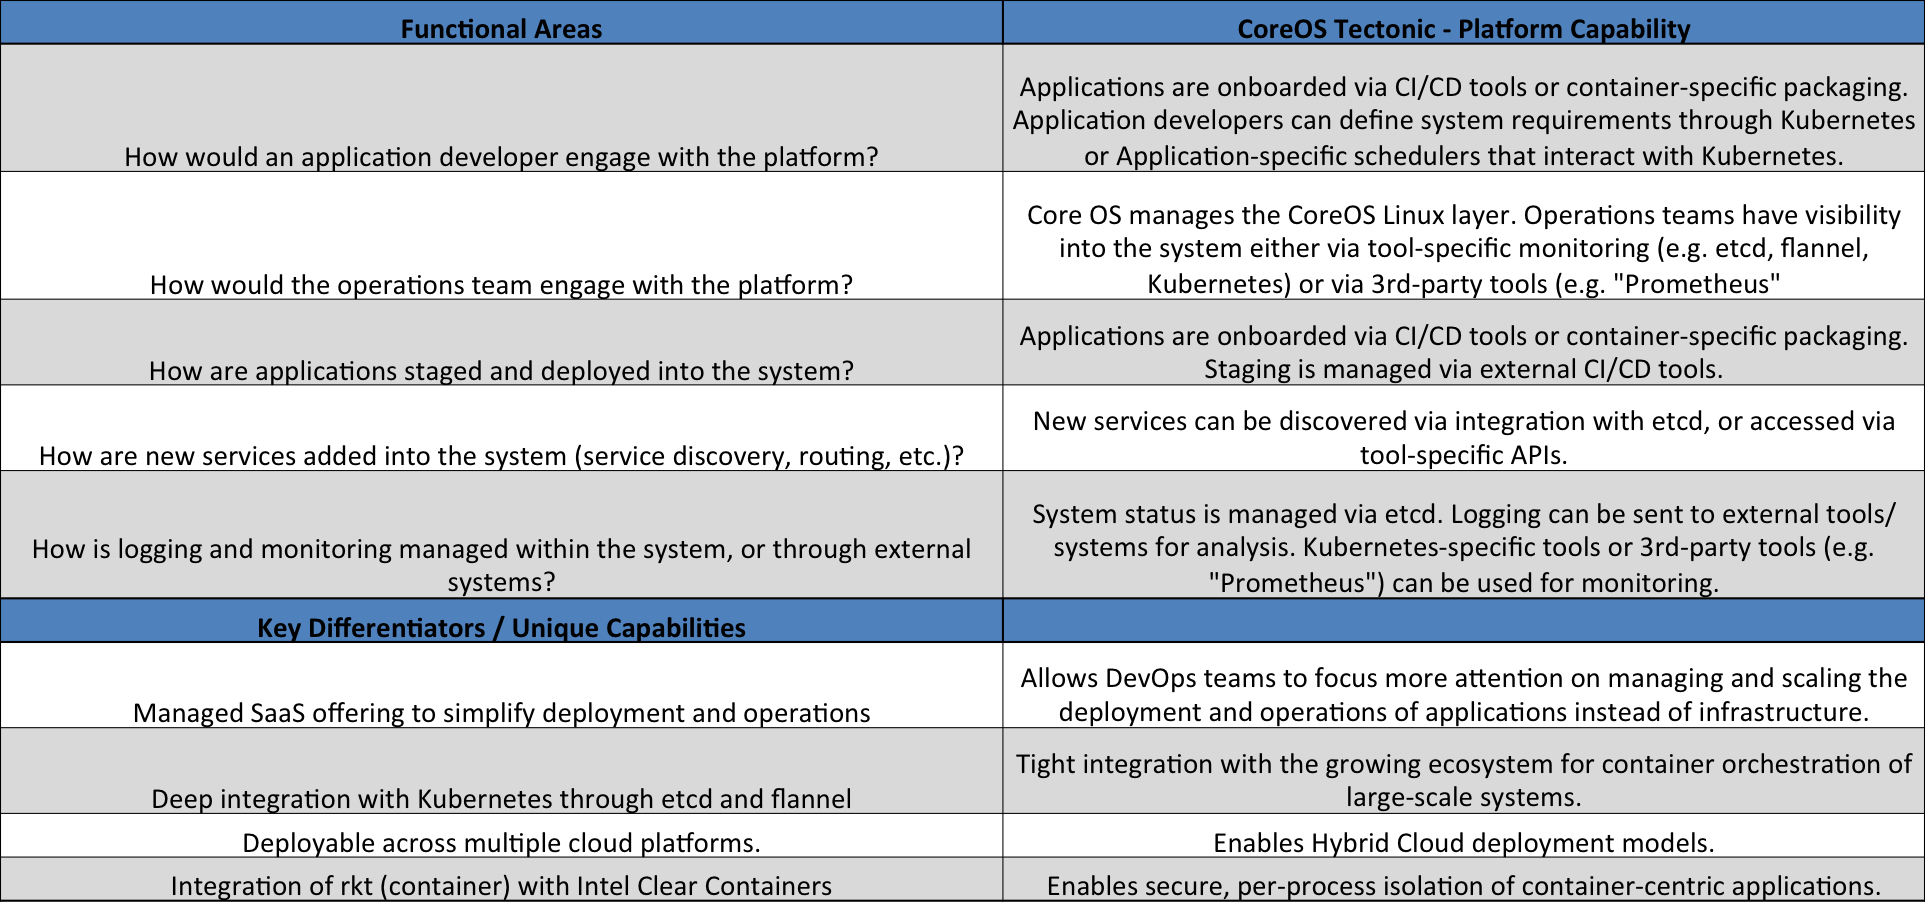 Table 8: Core OS Tectonic - Functional Areas, Key Differentiators, Unique Capabilities 